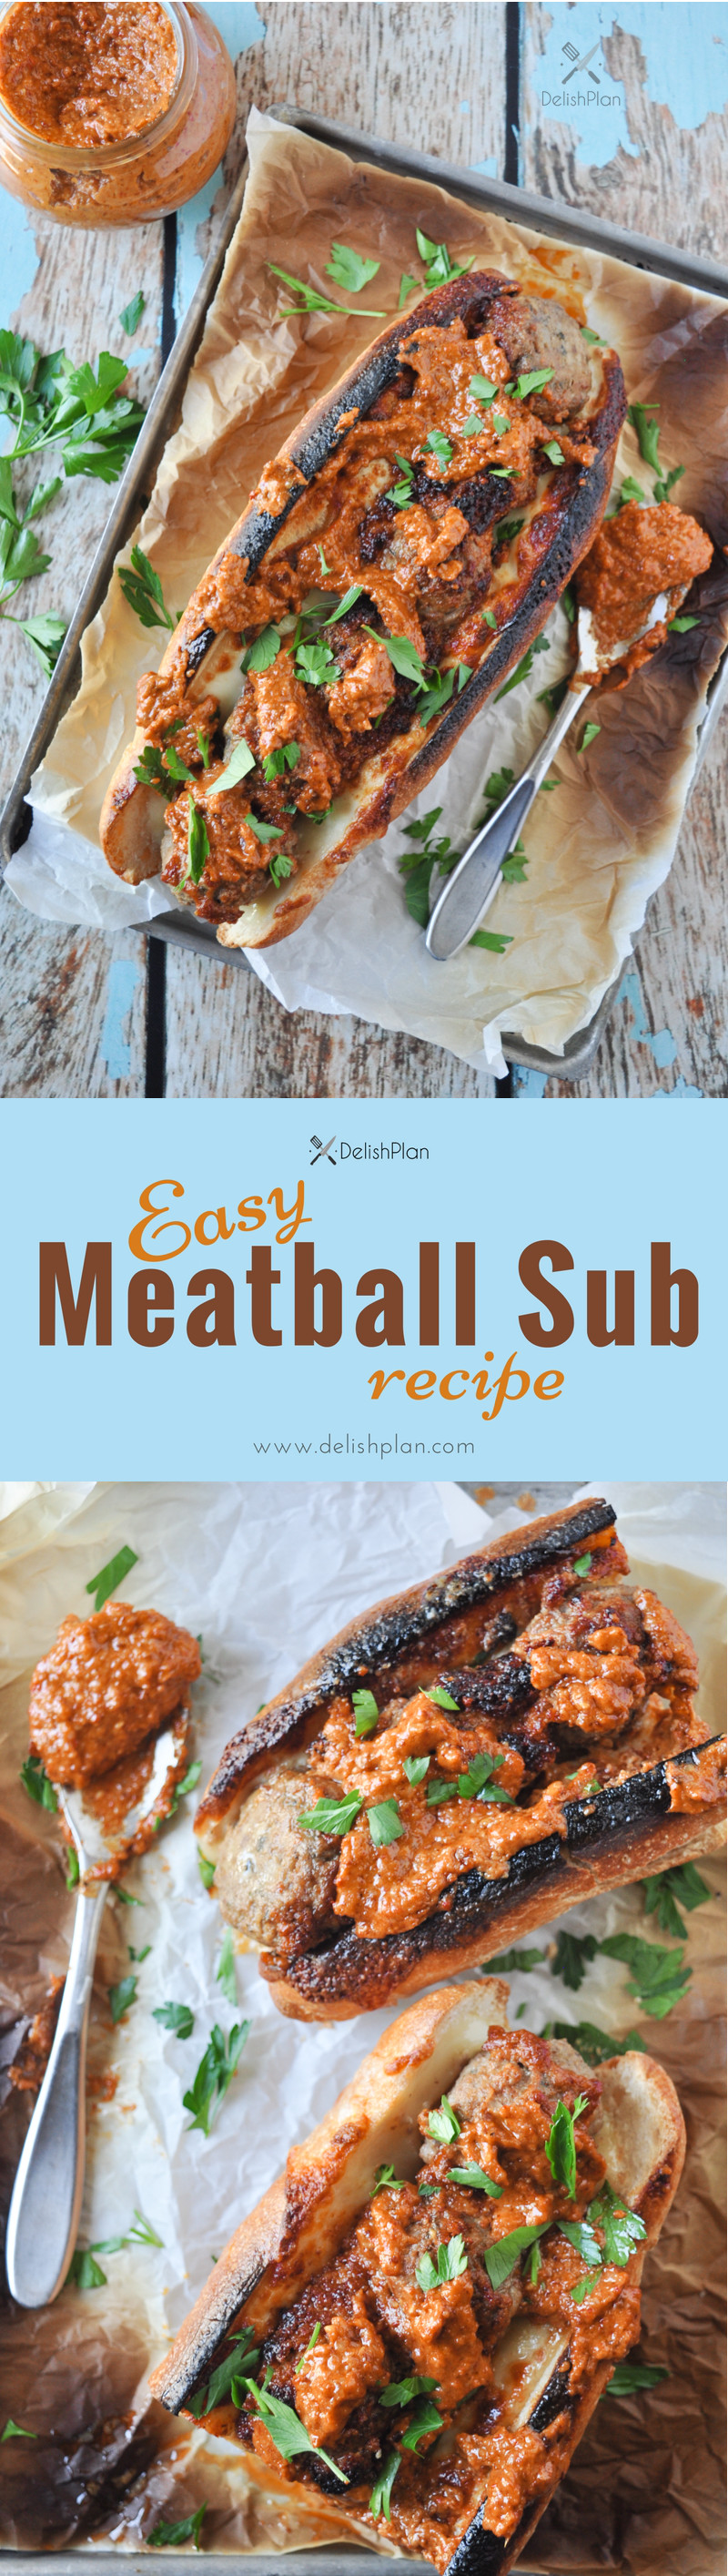 Easy meatball sub recipe that calls for only 5 ingredients and 10 minutes of your time. Wrap up this satisfying meal with a few leftover meatballs.